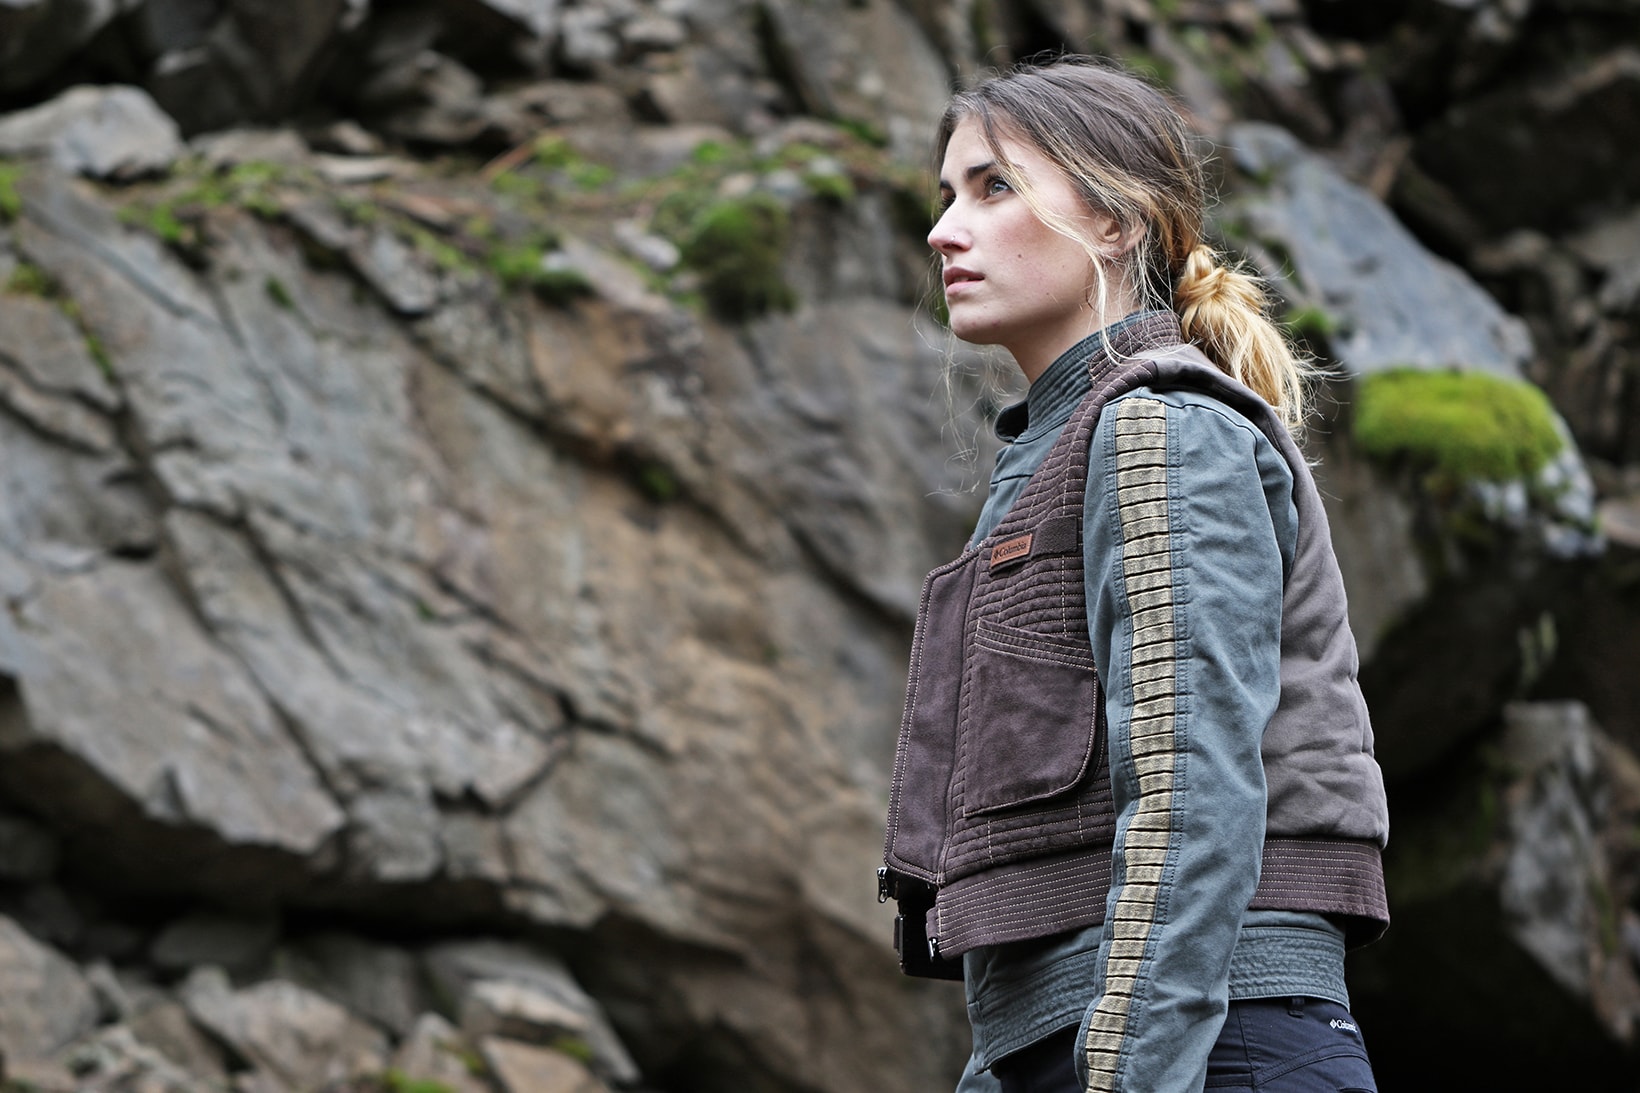 Star Wars Rogue One Columbia Jackets